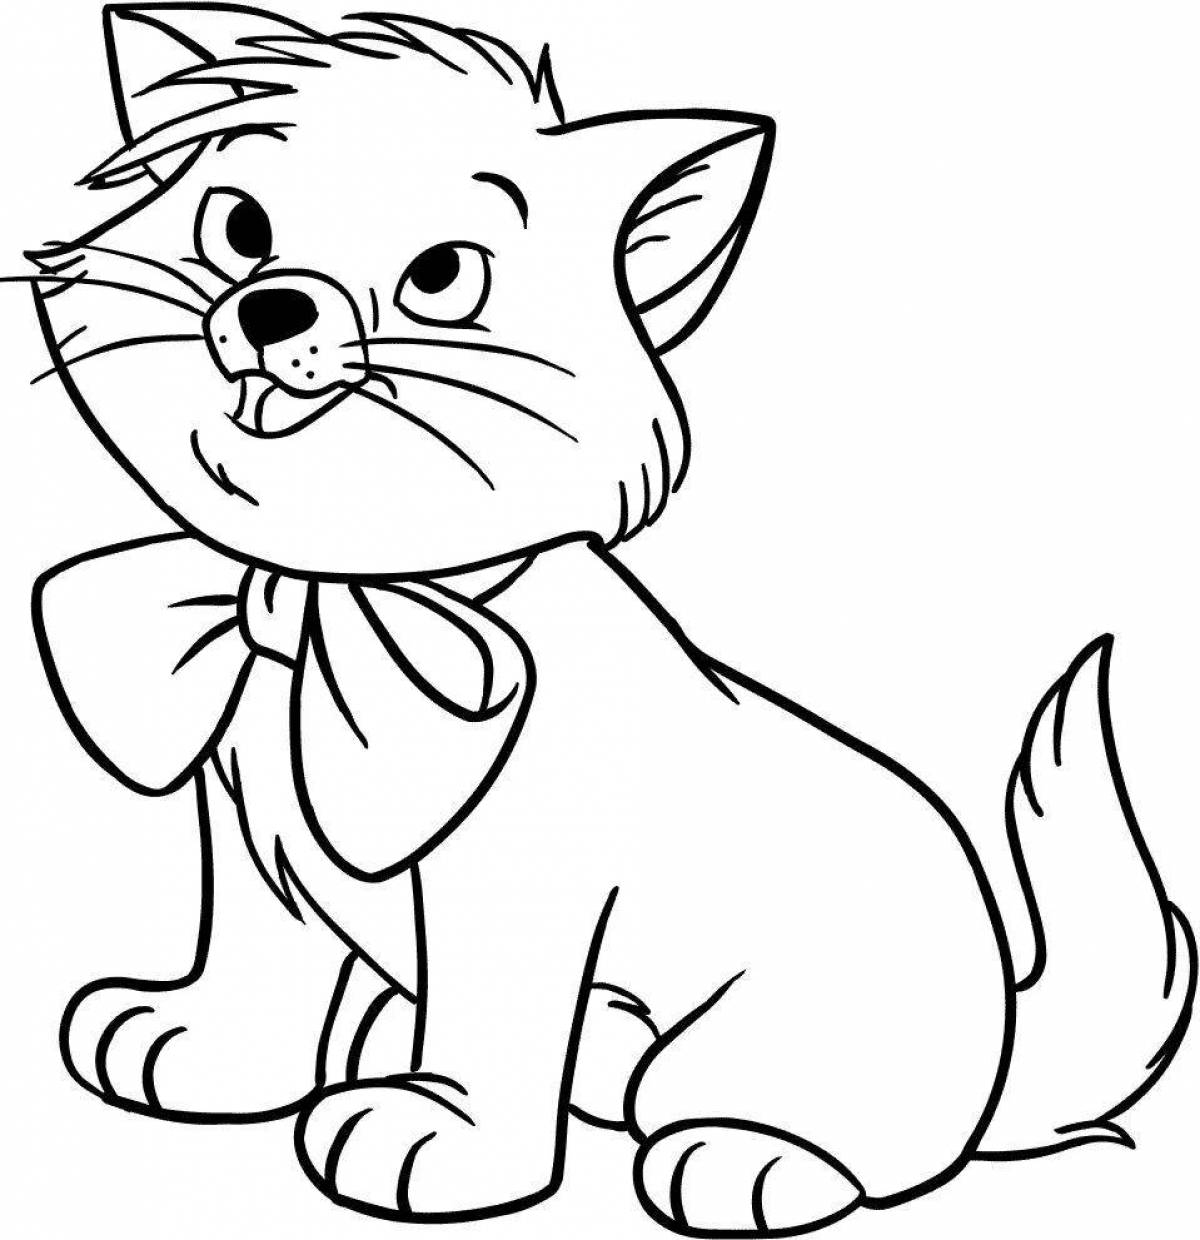 Adorable coloring book for kids 5-6 years old with cats